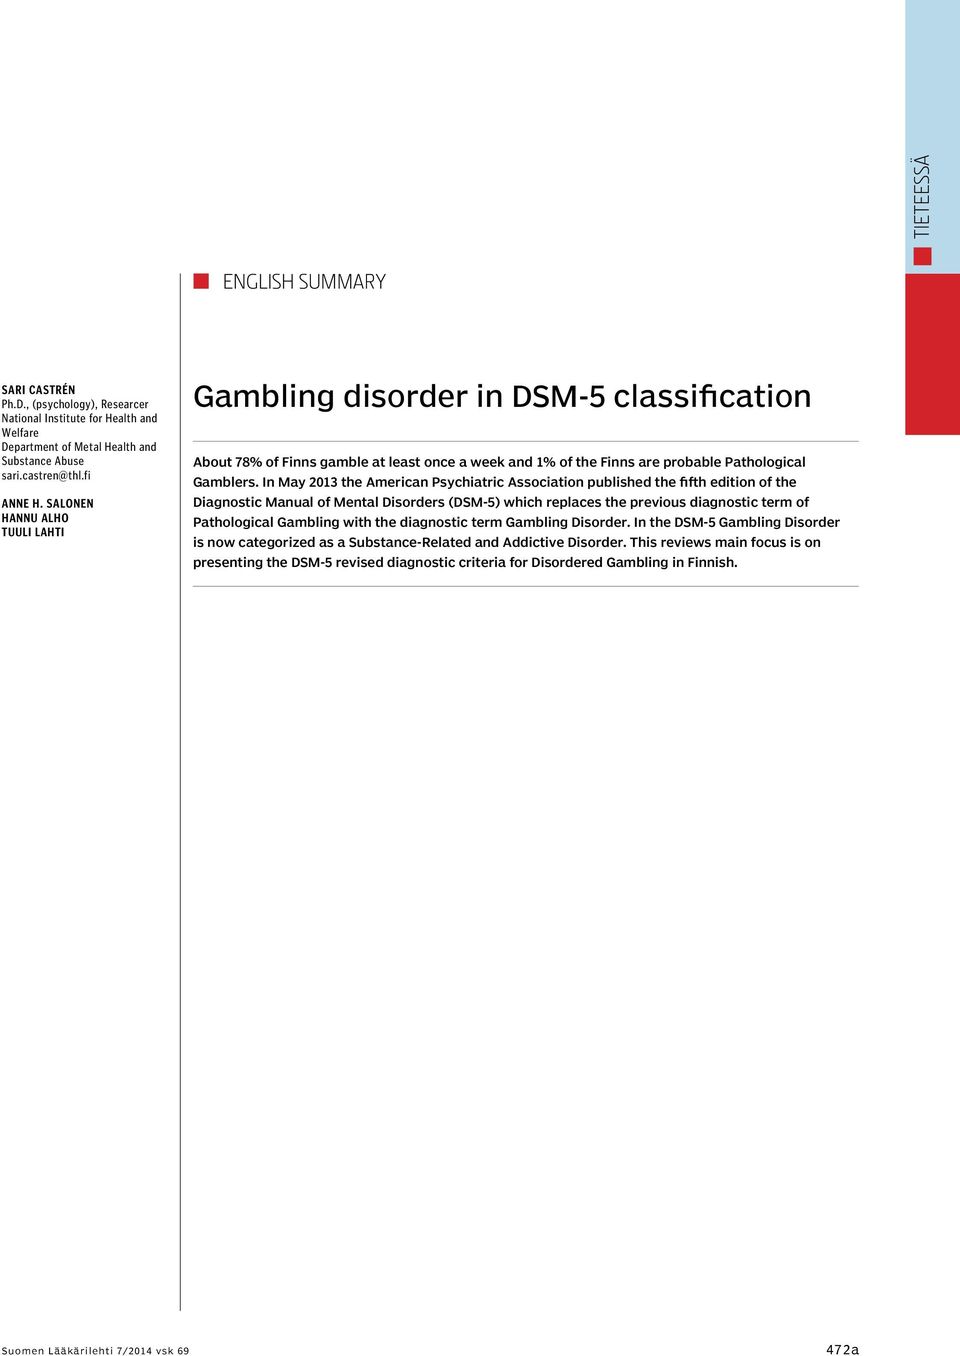 In May 2013 the American Psychiatric Association published the fifth edition of the Diagnostic Manual of Mental Disorders (DSM-5) which replaces the previous diagnostic term of Pathological Gambling